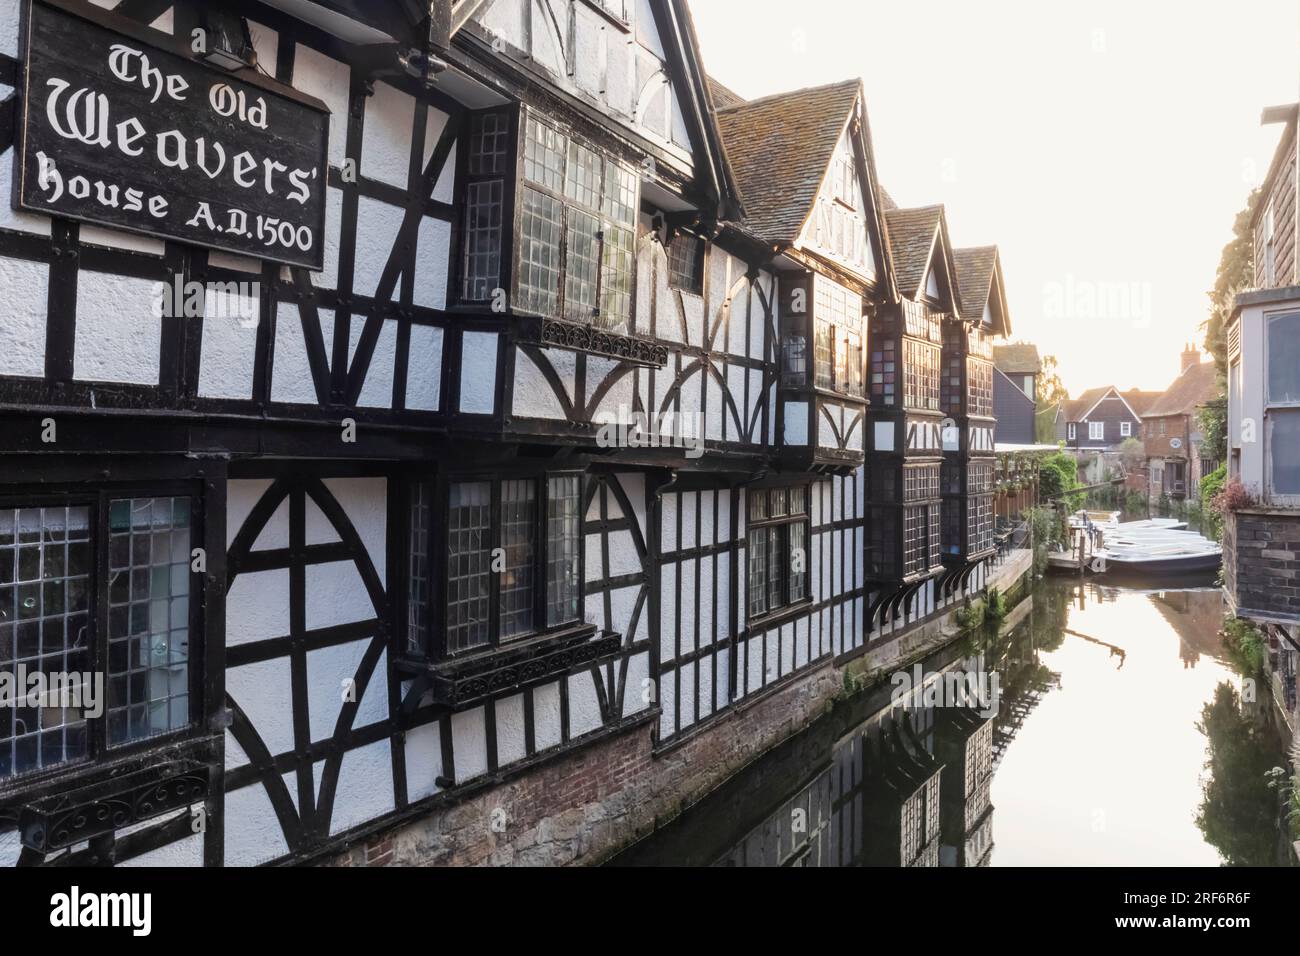 England, Kent, Canterbury, The Old Weavers House and The Great Stour River Stock Photo